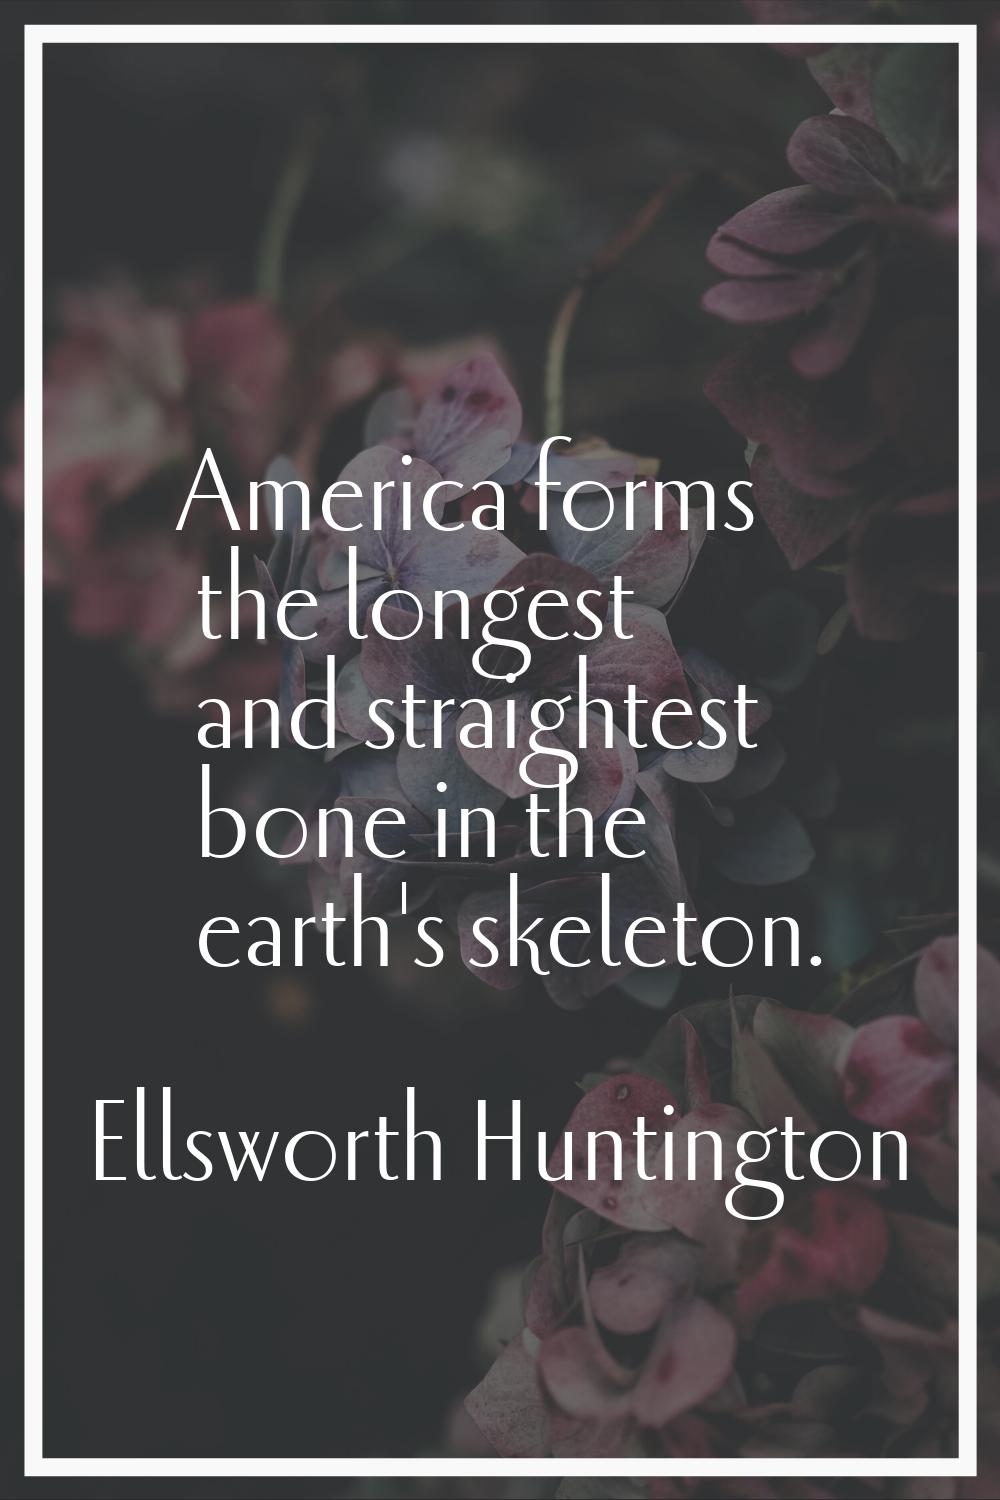 America forms the longest and straightest bone in the earth's skeleton.